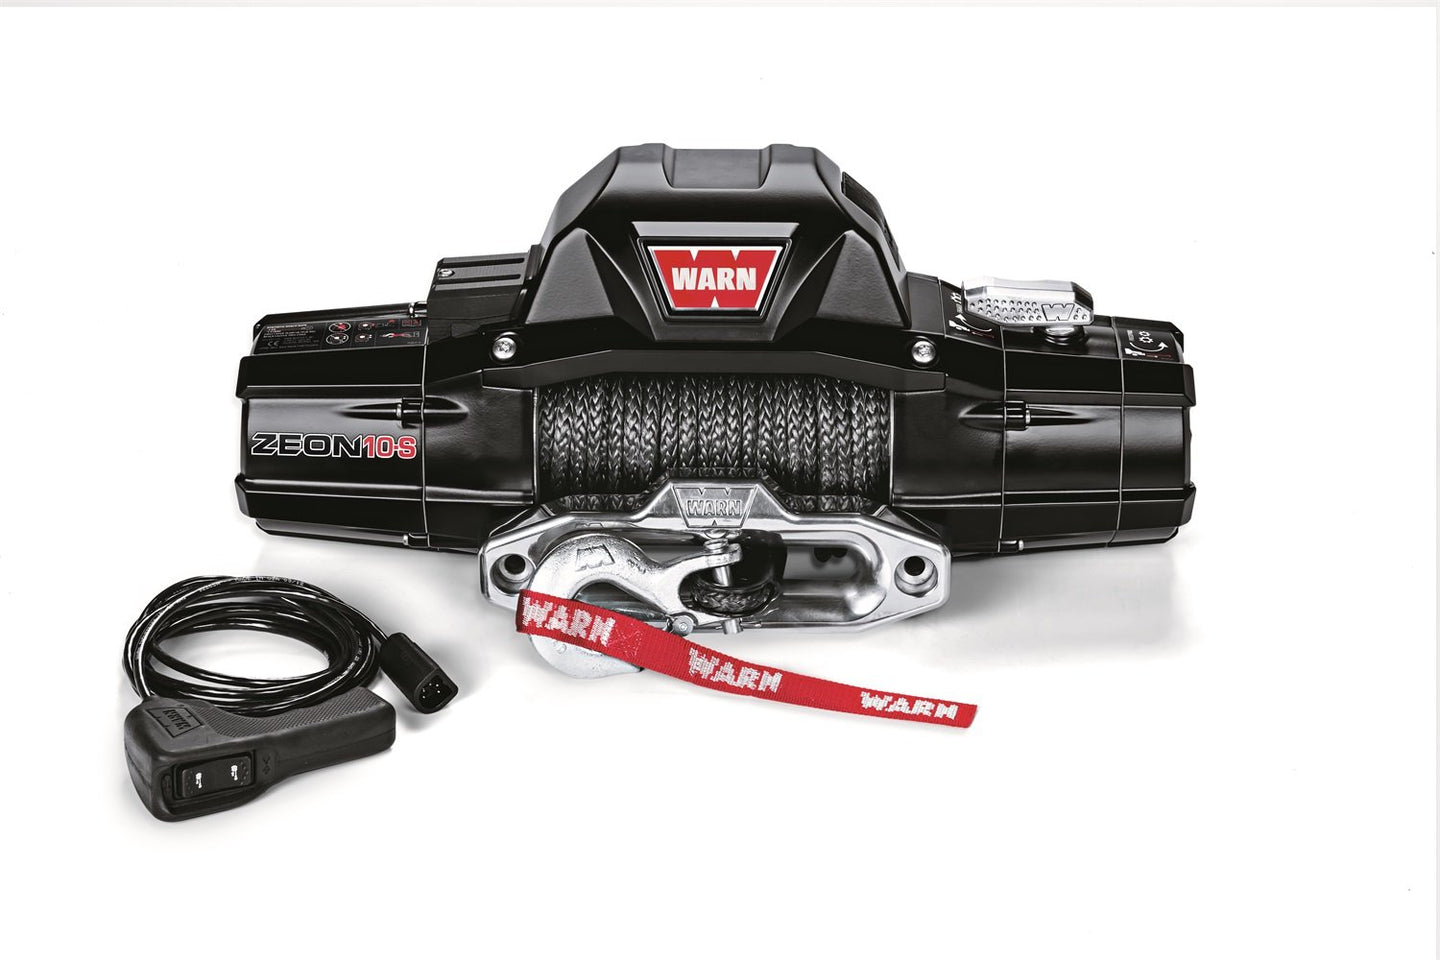 Warn ZEON 10-S 10000lb Recovery Winch with Spydura Synthetic Rope